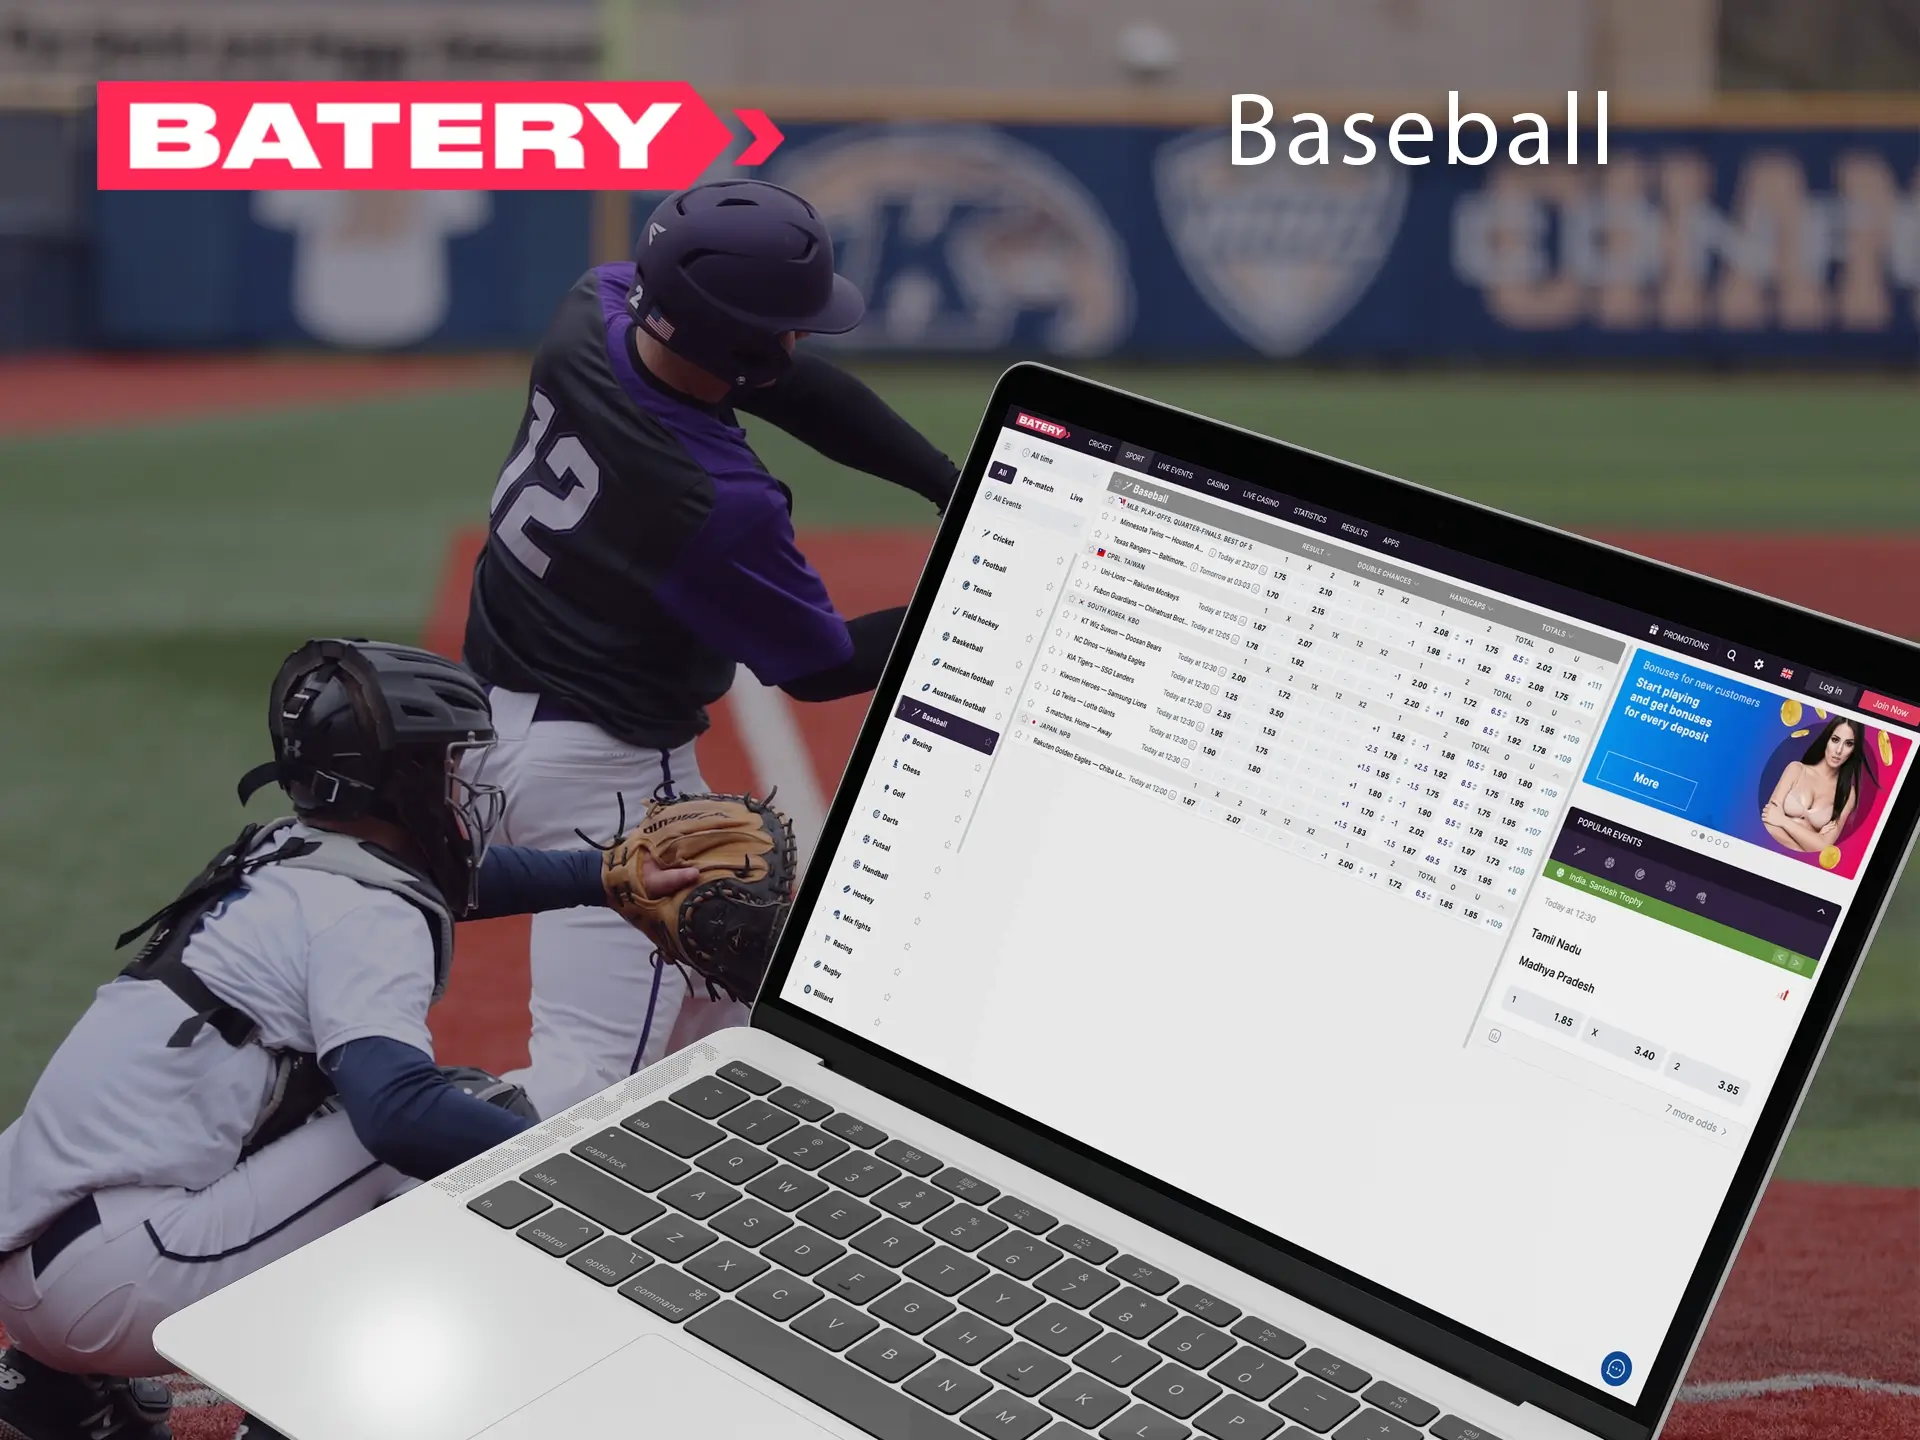 Baseball together with Batery will give their customers a lot of positive emotions and adrenaline.